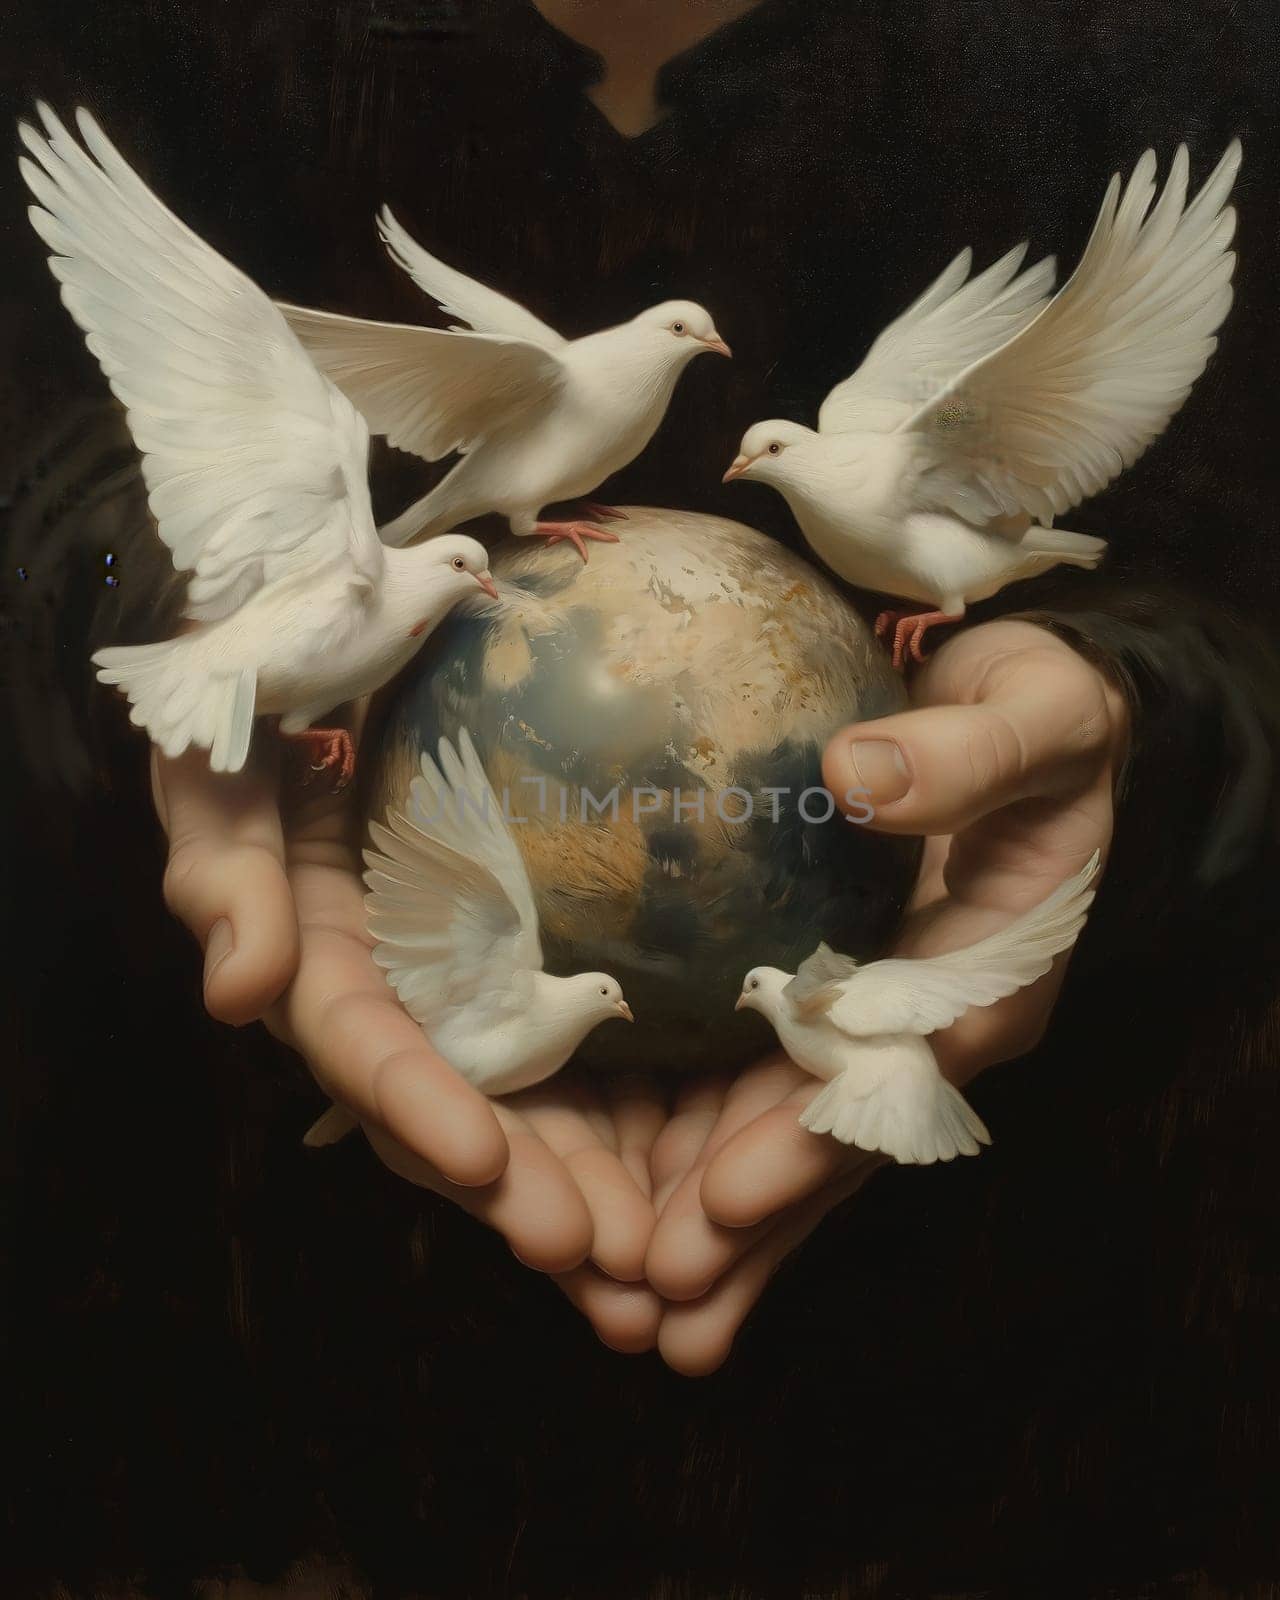 Hands Cradling Earth Surrounded by Doves. by Fischeron